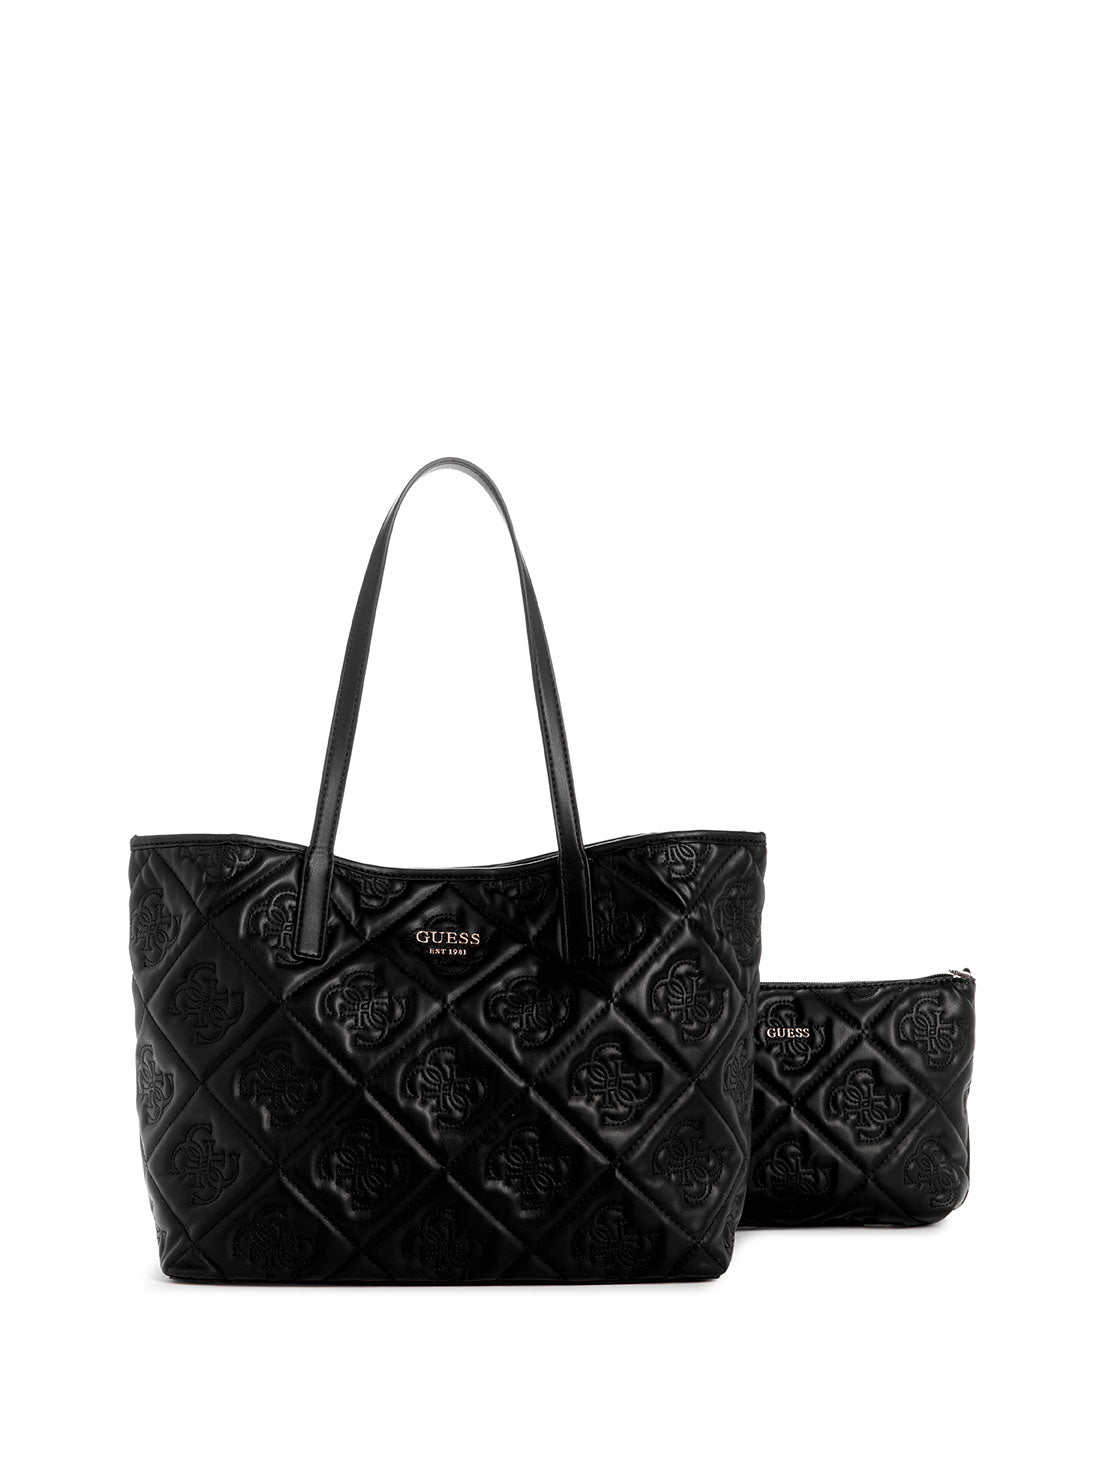 GUESS Black Logo Vikky 2 in 1 Tote Bag front view